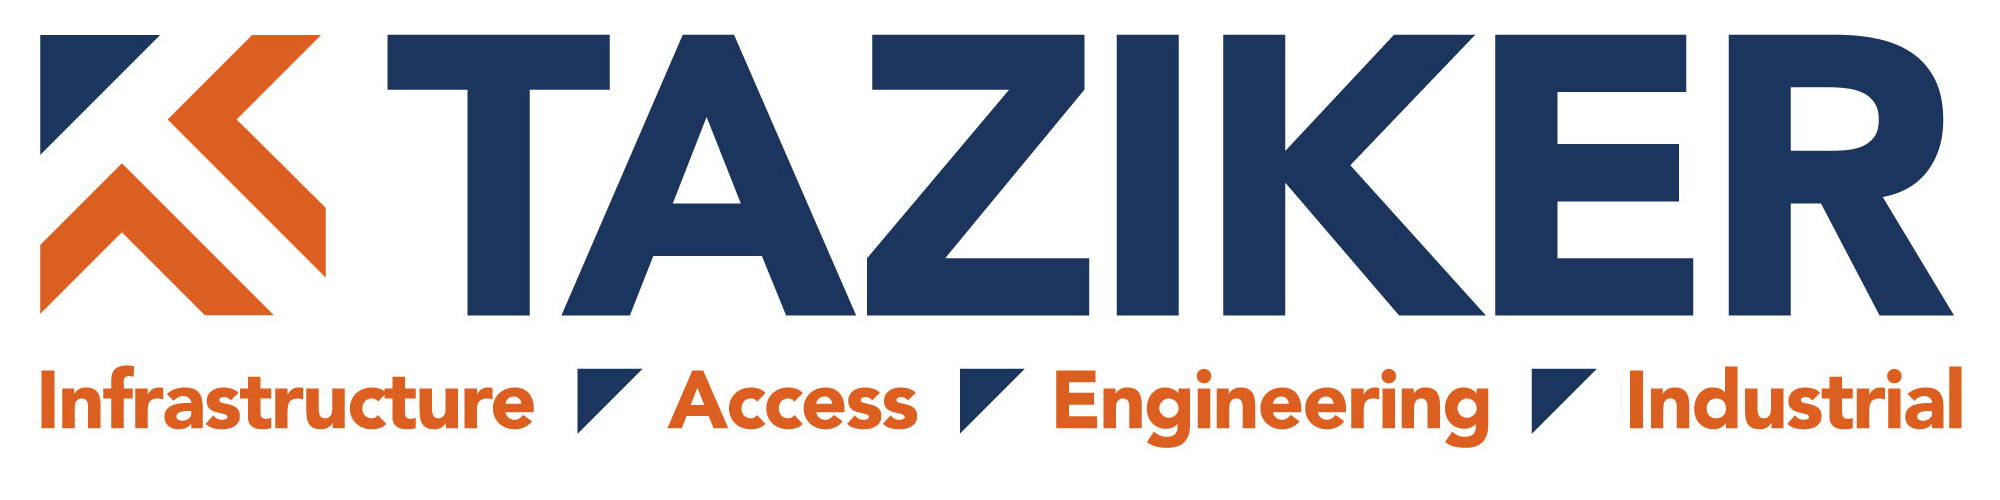 New Taziker logo "Taziker Infrastructure, Access, Engineering, Industrial".